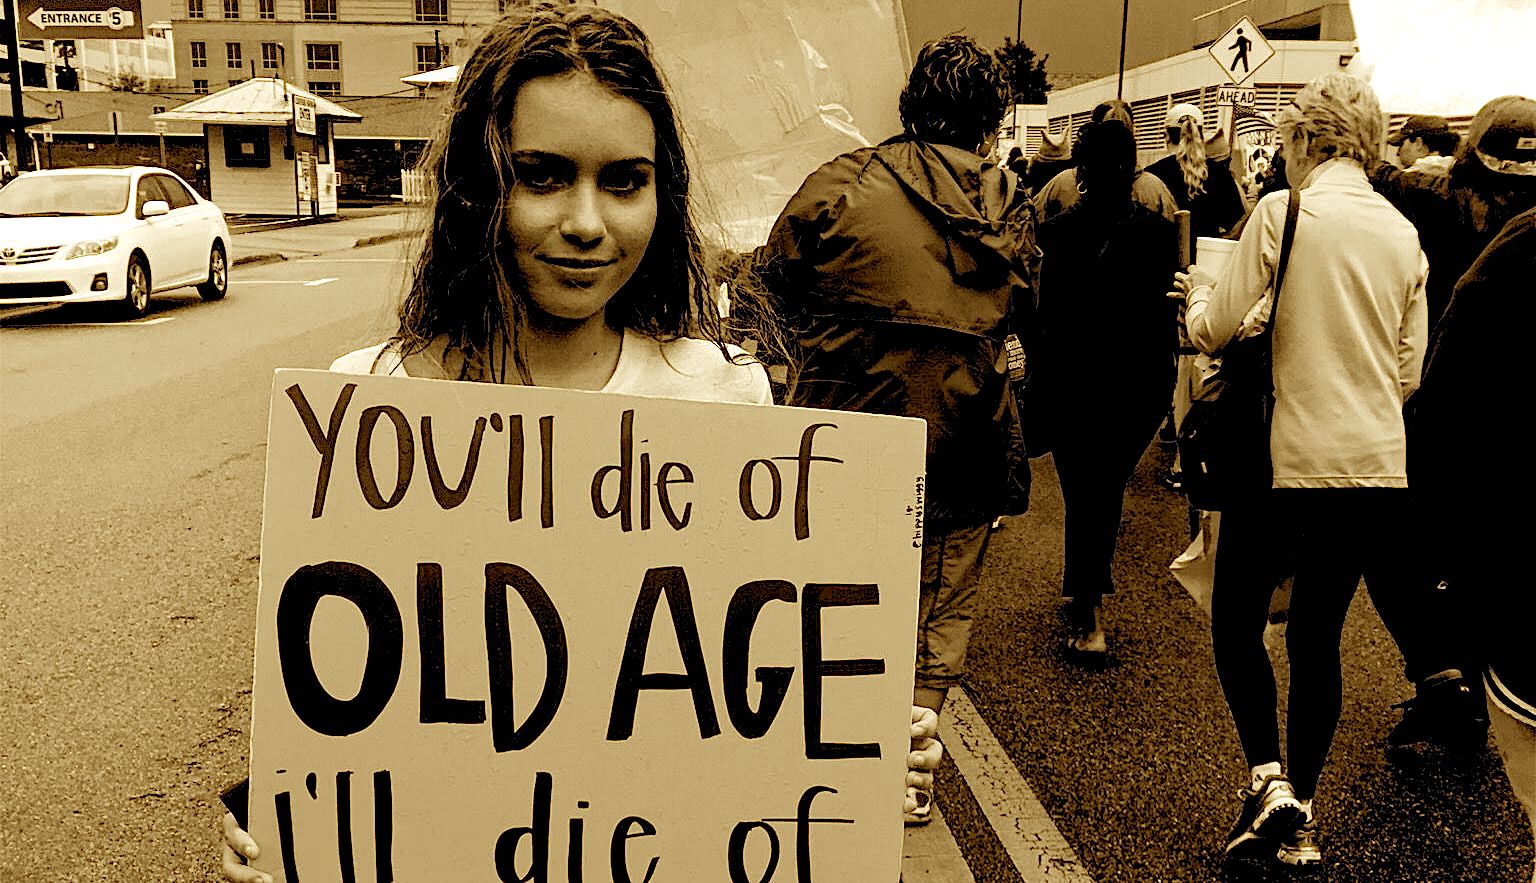 old age climate change 10 You'll die of old age, I'll die of climate change